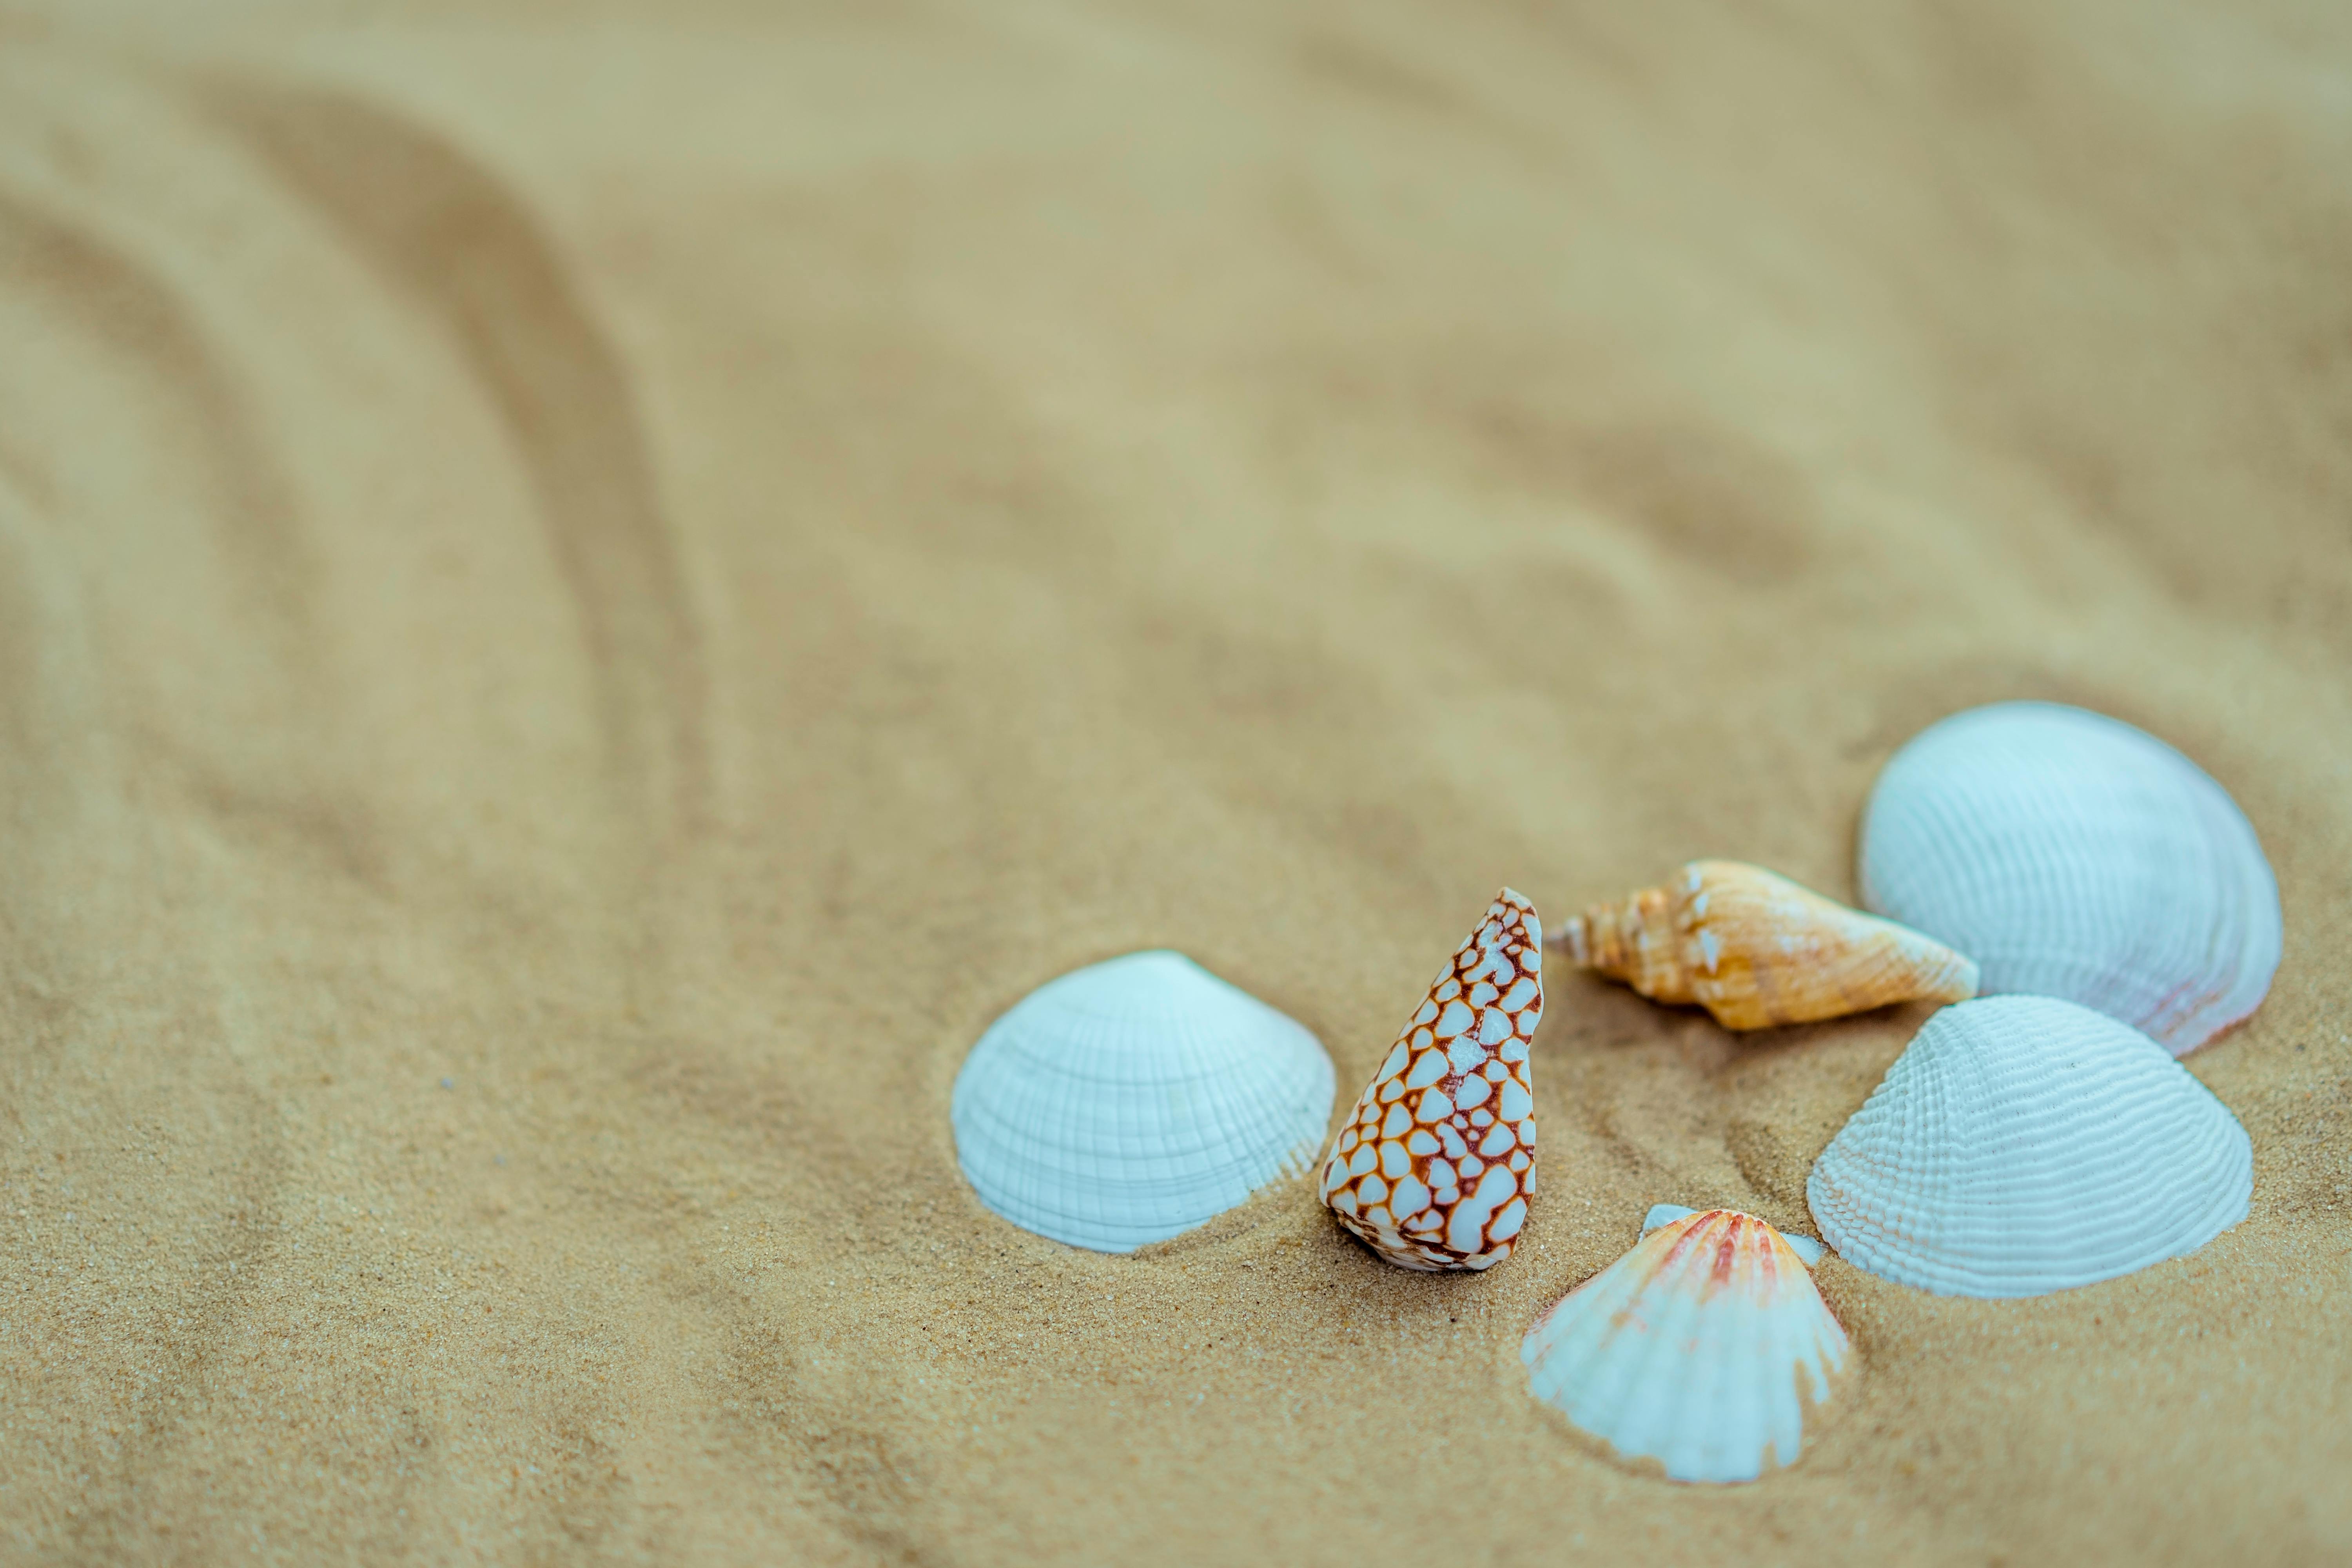 Seashell Photos, Download The BEST Free Seashell Stock Photos & HD Images